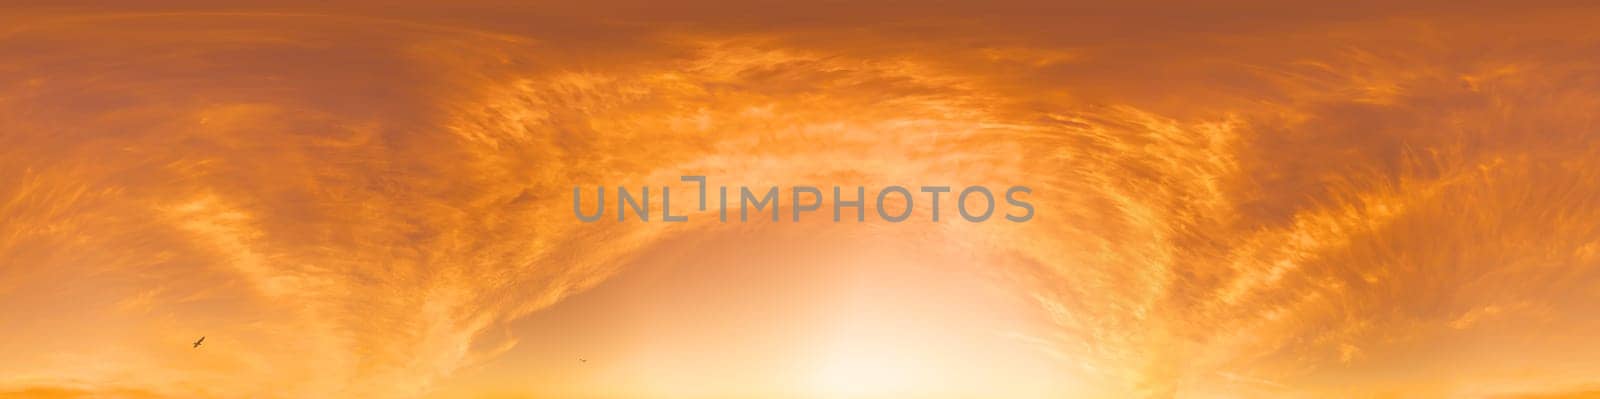 Bright sunset sky panorama with Cirrus clouds. Seamless hdr spherical equirectangular 360 panorama. Sky dome or zenith for 3D visualization, game and sky replacement for aerial drone 360 panoramas.